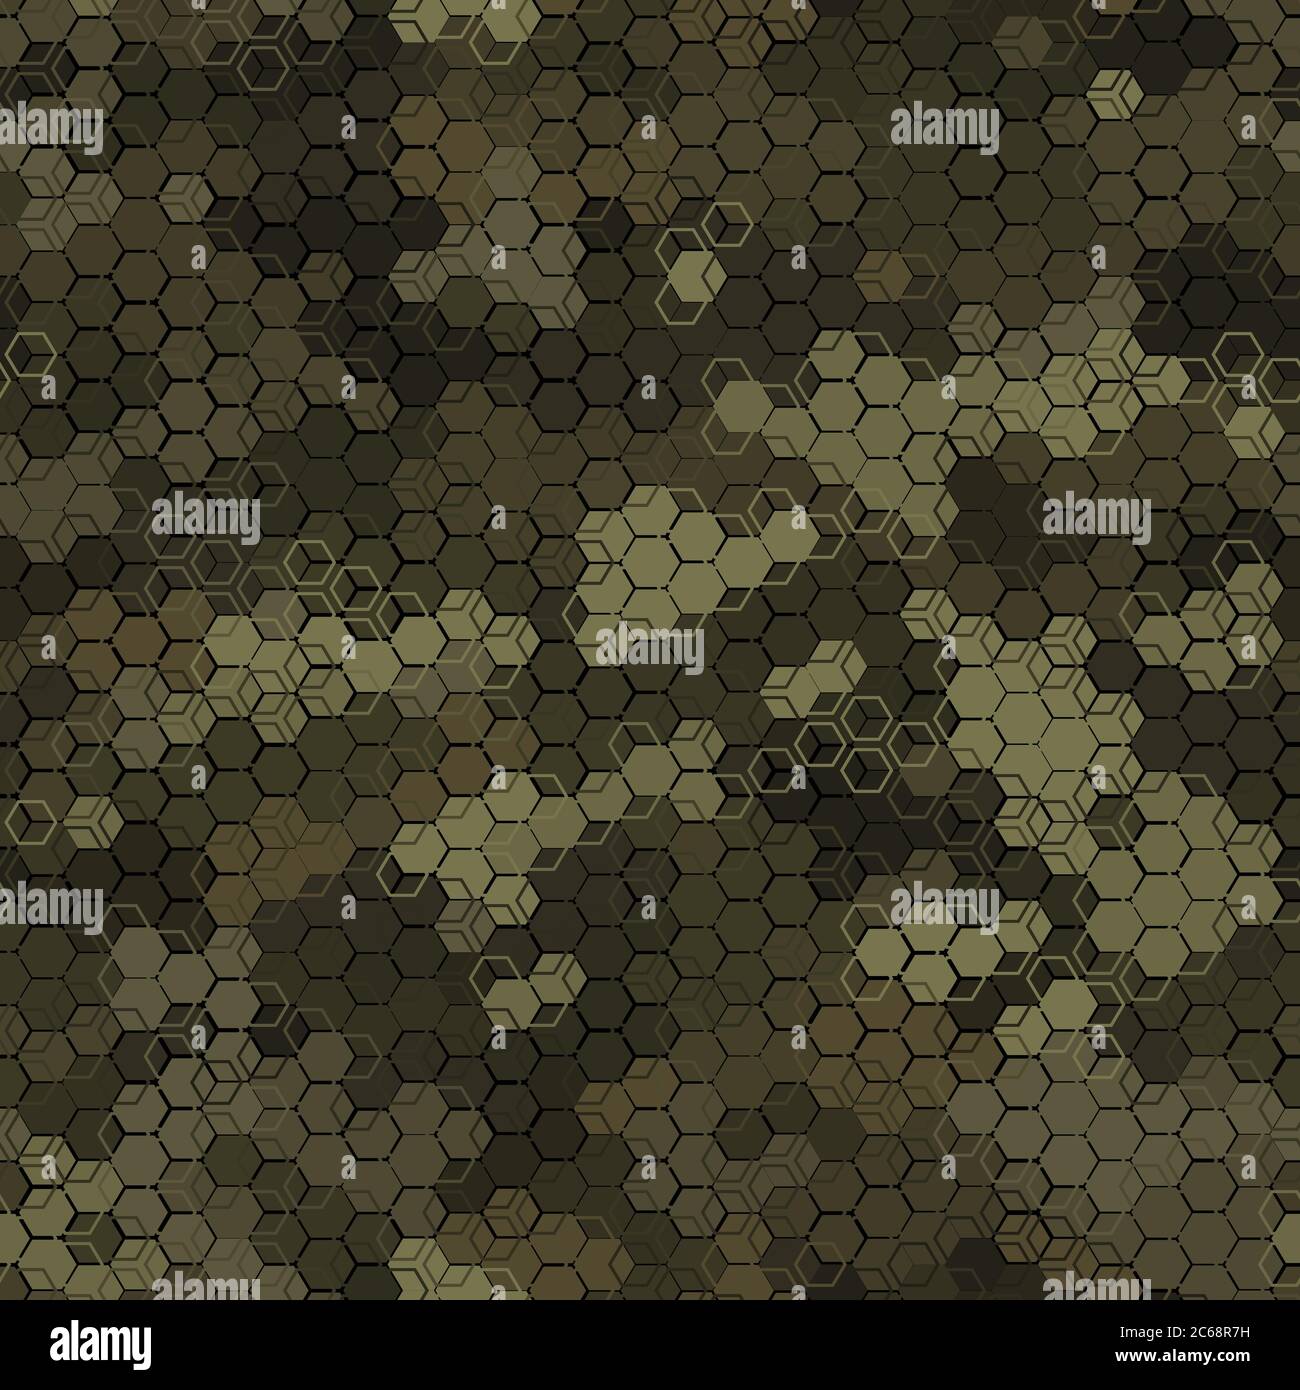 Texture military olive and tan colors forest camouflage seamless pattern. Urban hexagon snakeskin. Abstract army and hunting masking ornament texture. Stock Vector